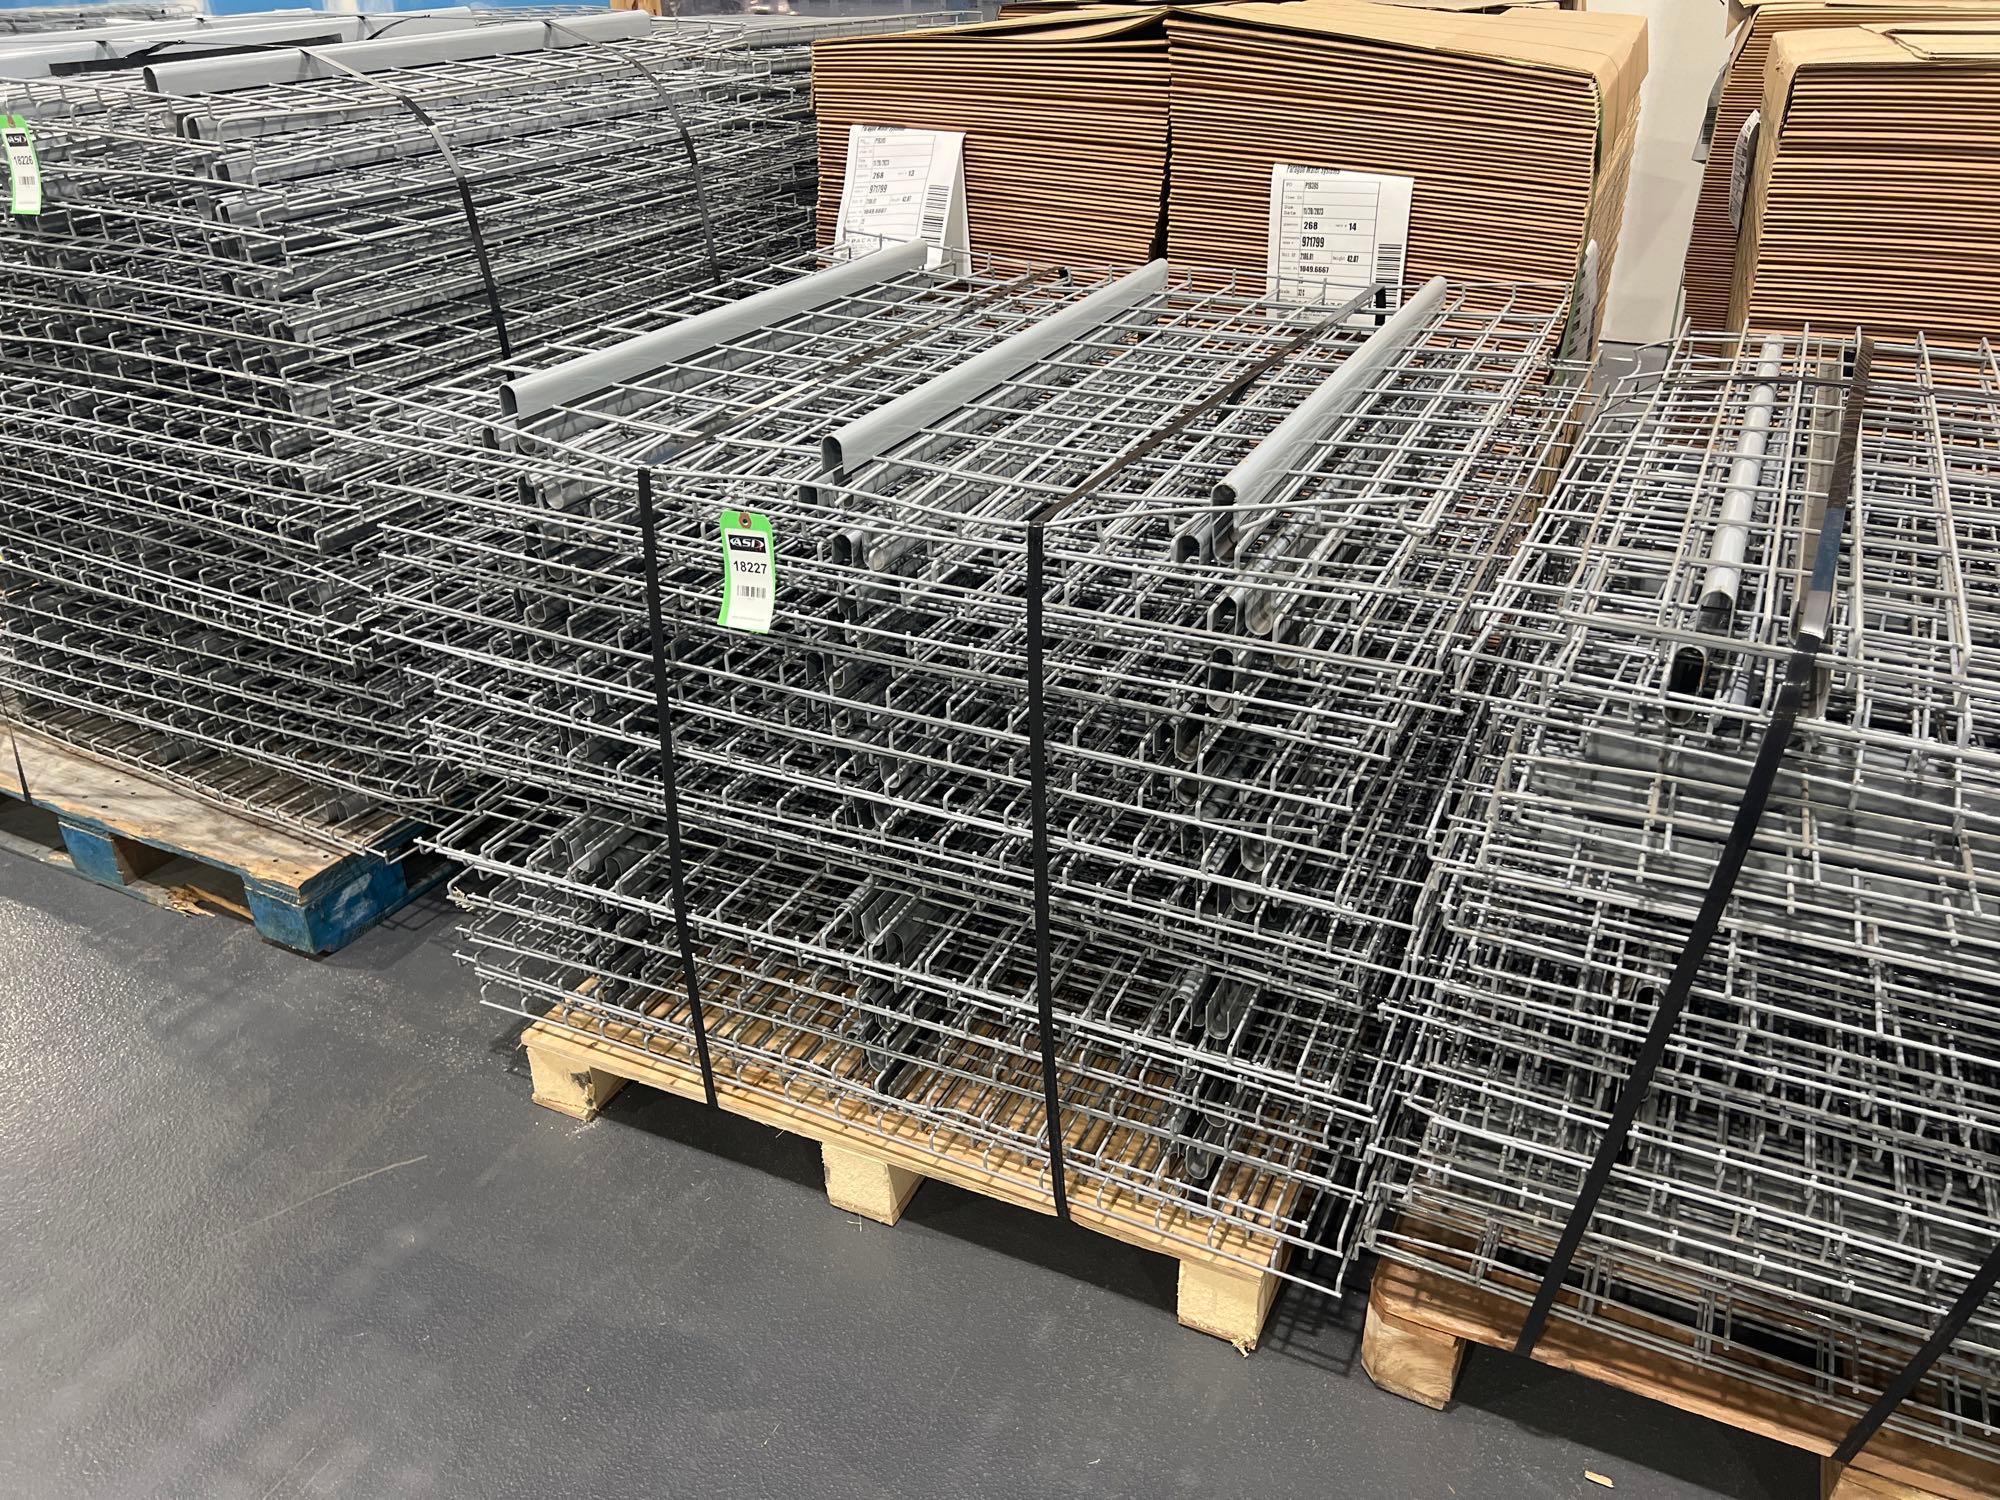 PALLET OF APPROX. 34 WIRE GRATES FOR PALLET RACKING, APPROX. DIMENSIONS 43" X 45"